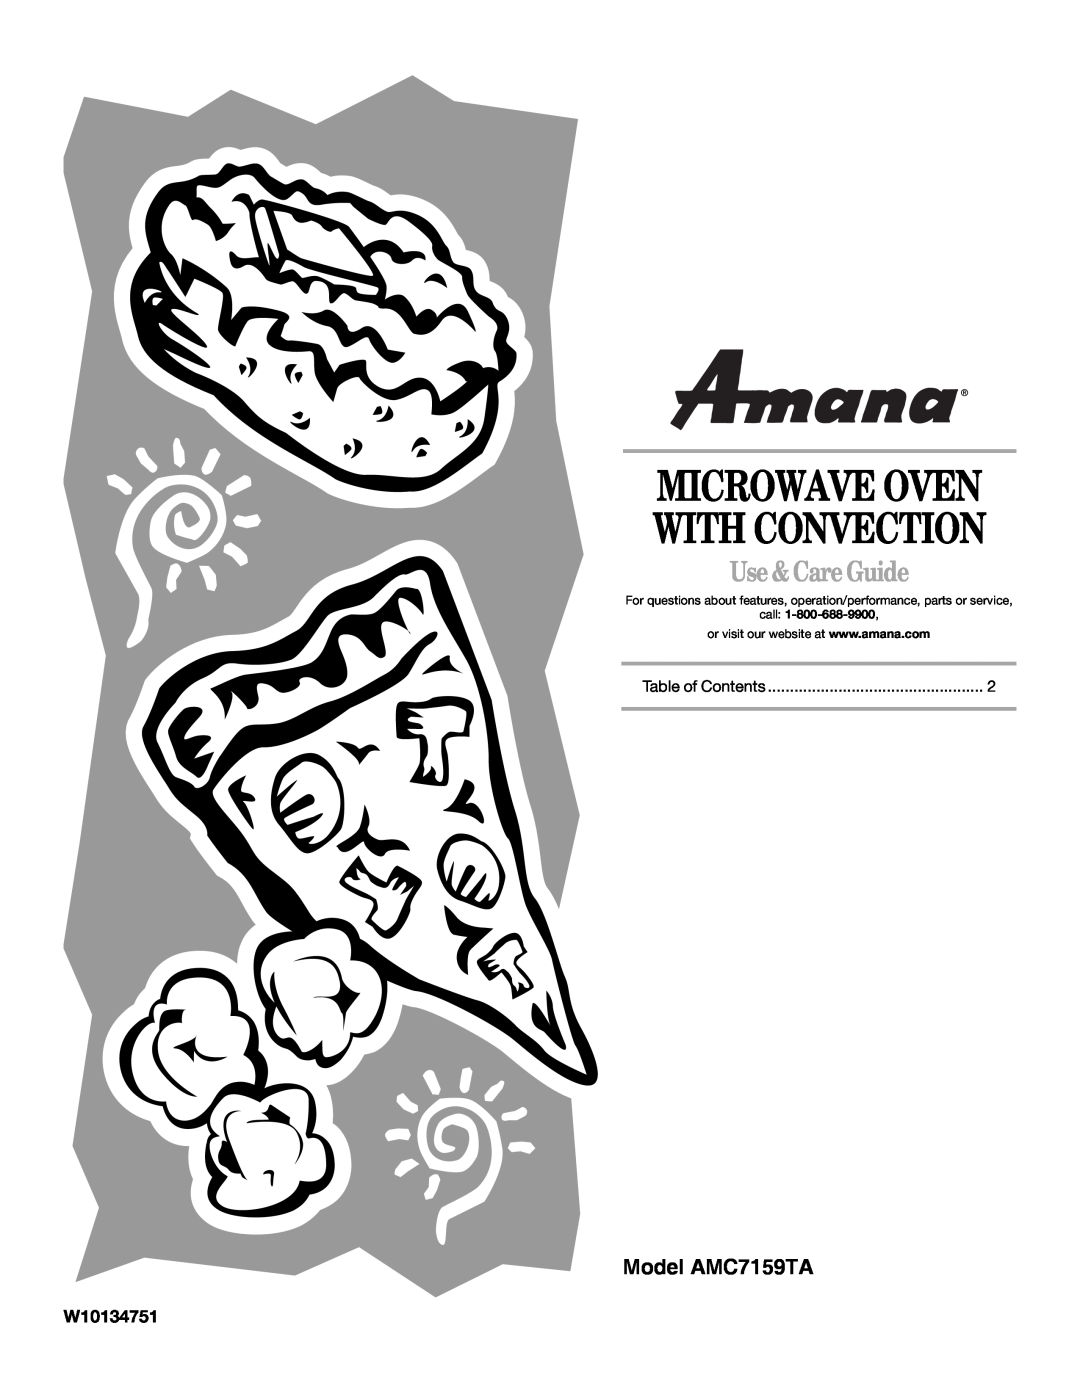 Amana manual Model AMC7159TA, Microwave Oven With Convection, Use&CareGuide, call 